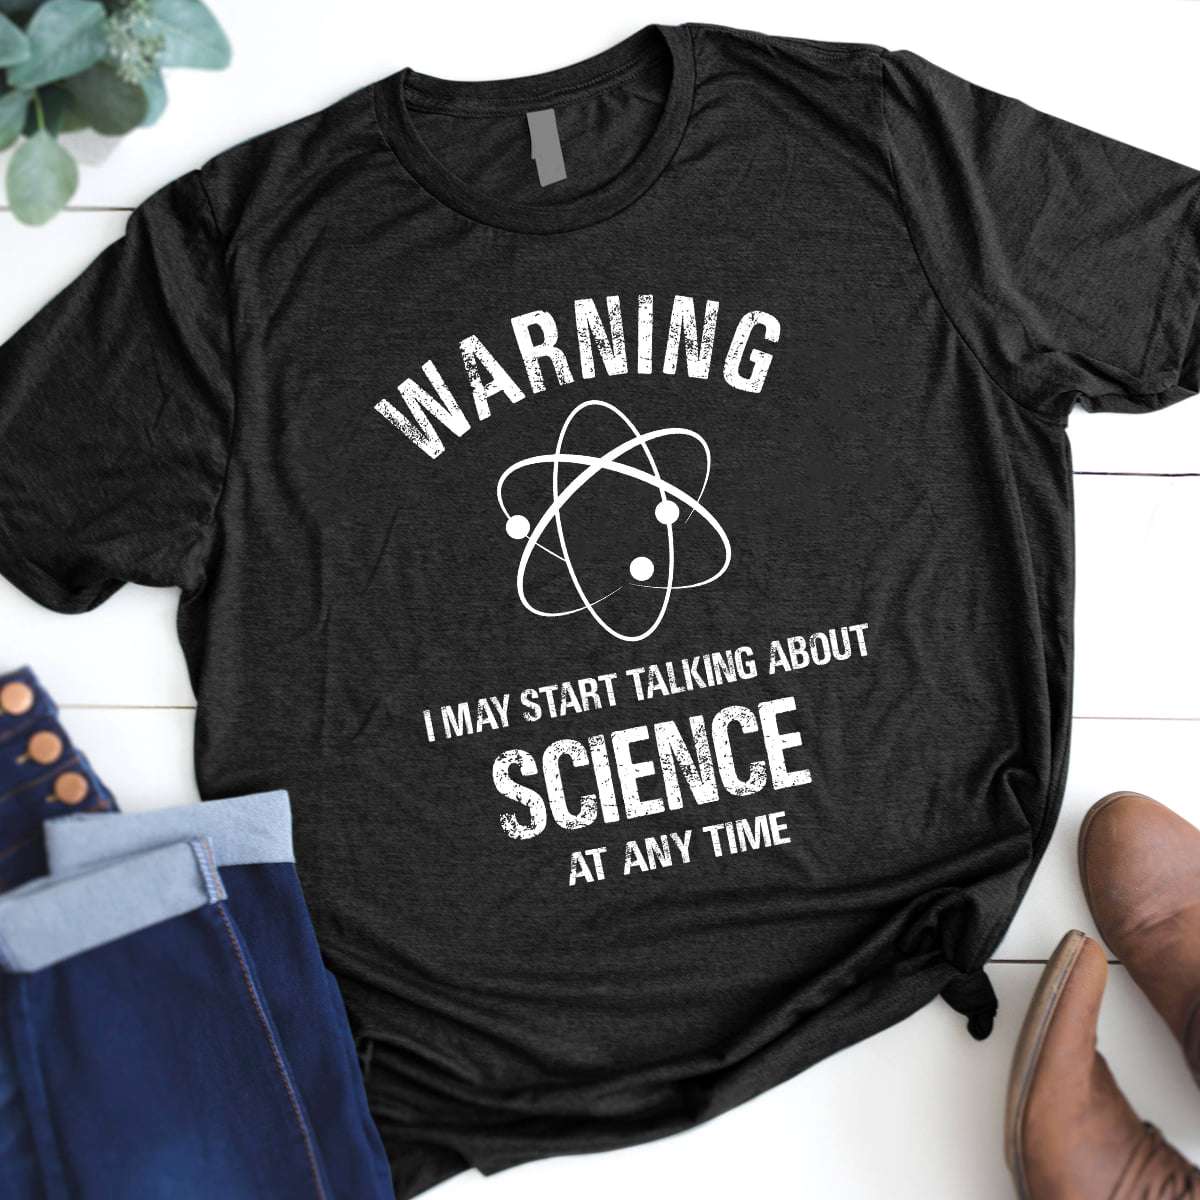 Warning I may start talking about science at any time - Science lover